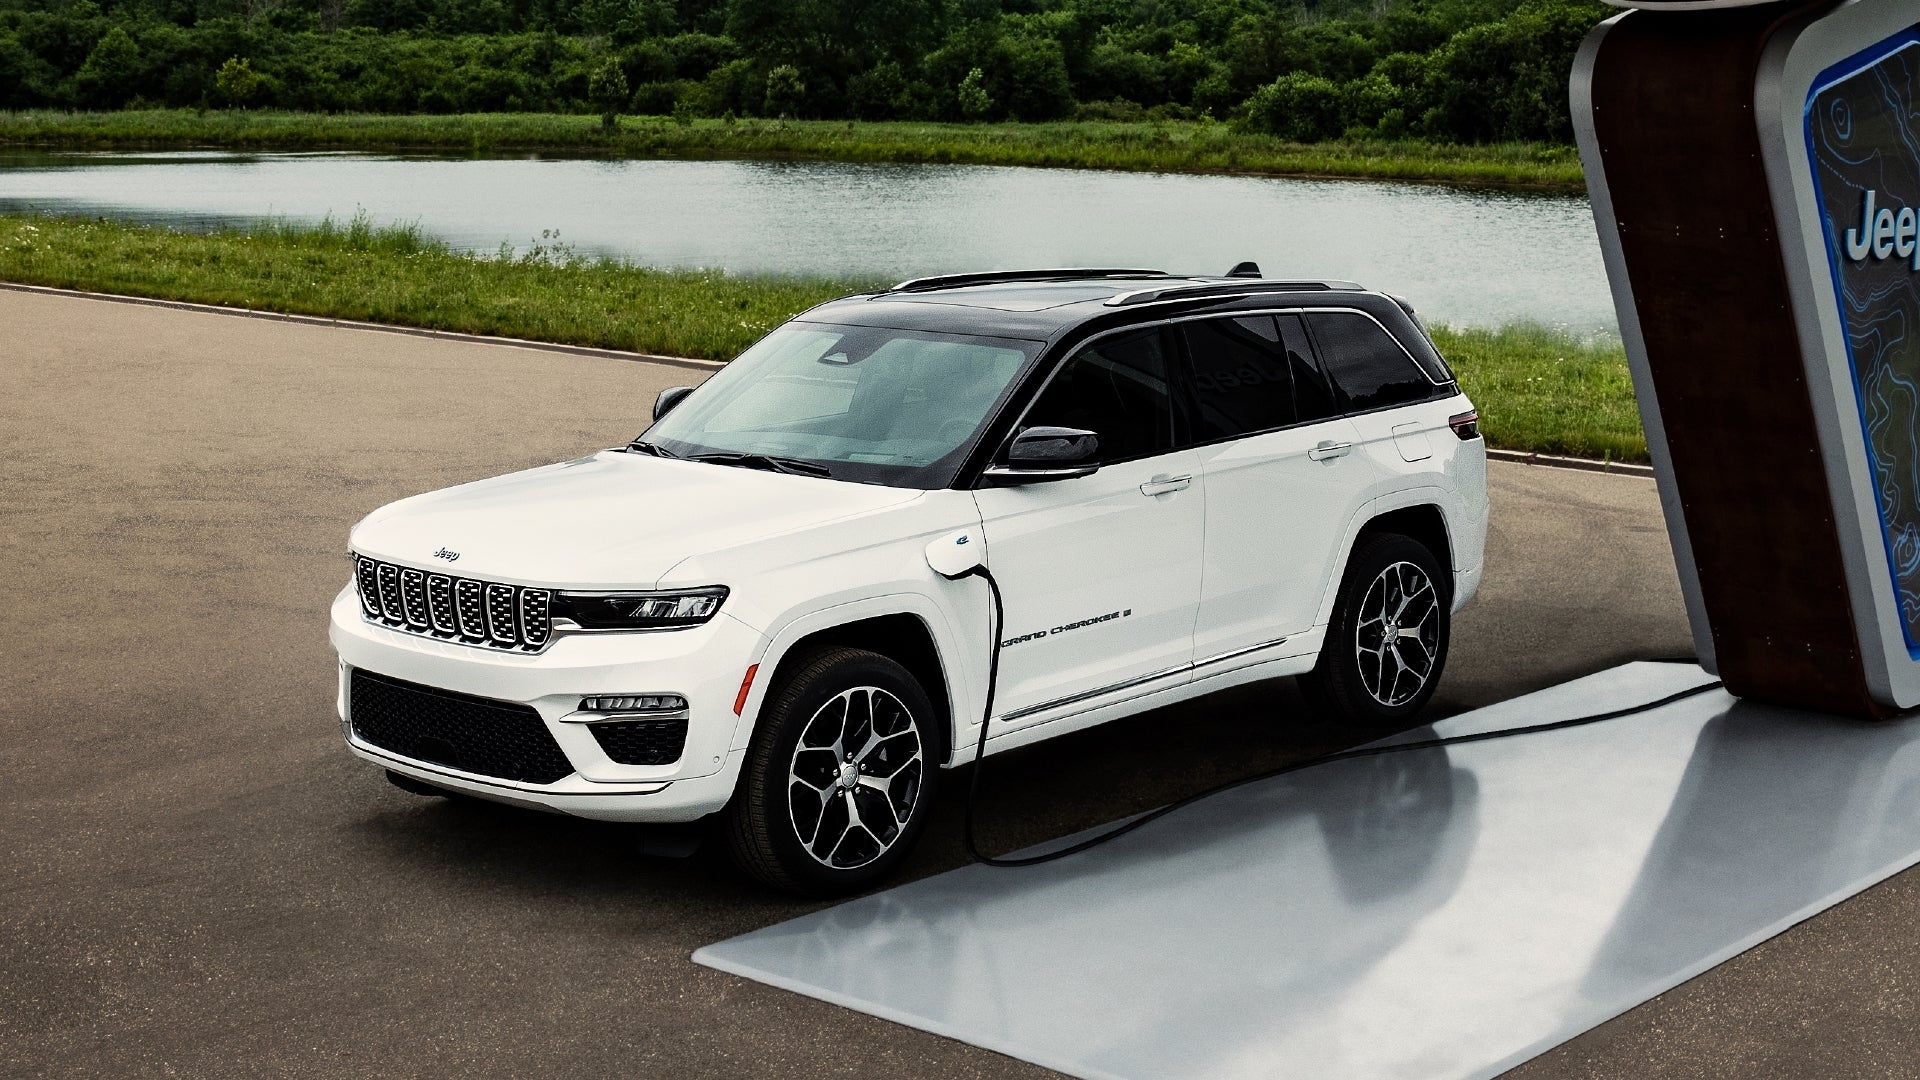 Here's Your First Look at the 2022 Jeep Grand Cherokee Two-Row SUV